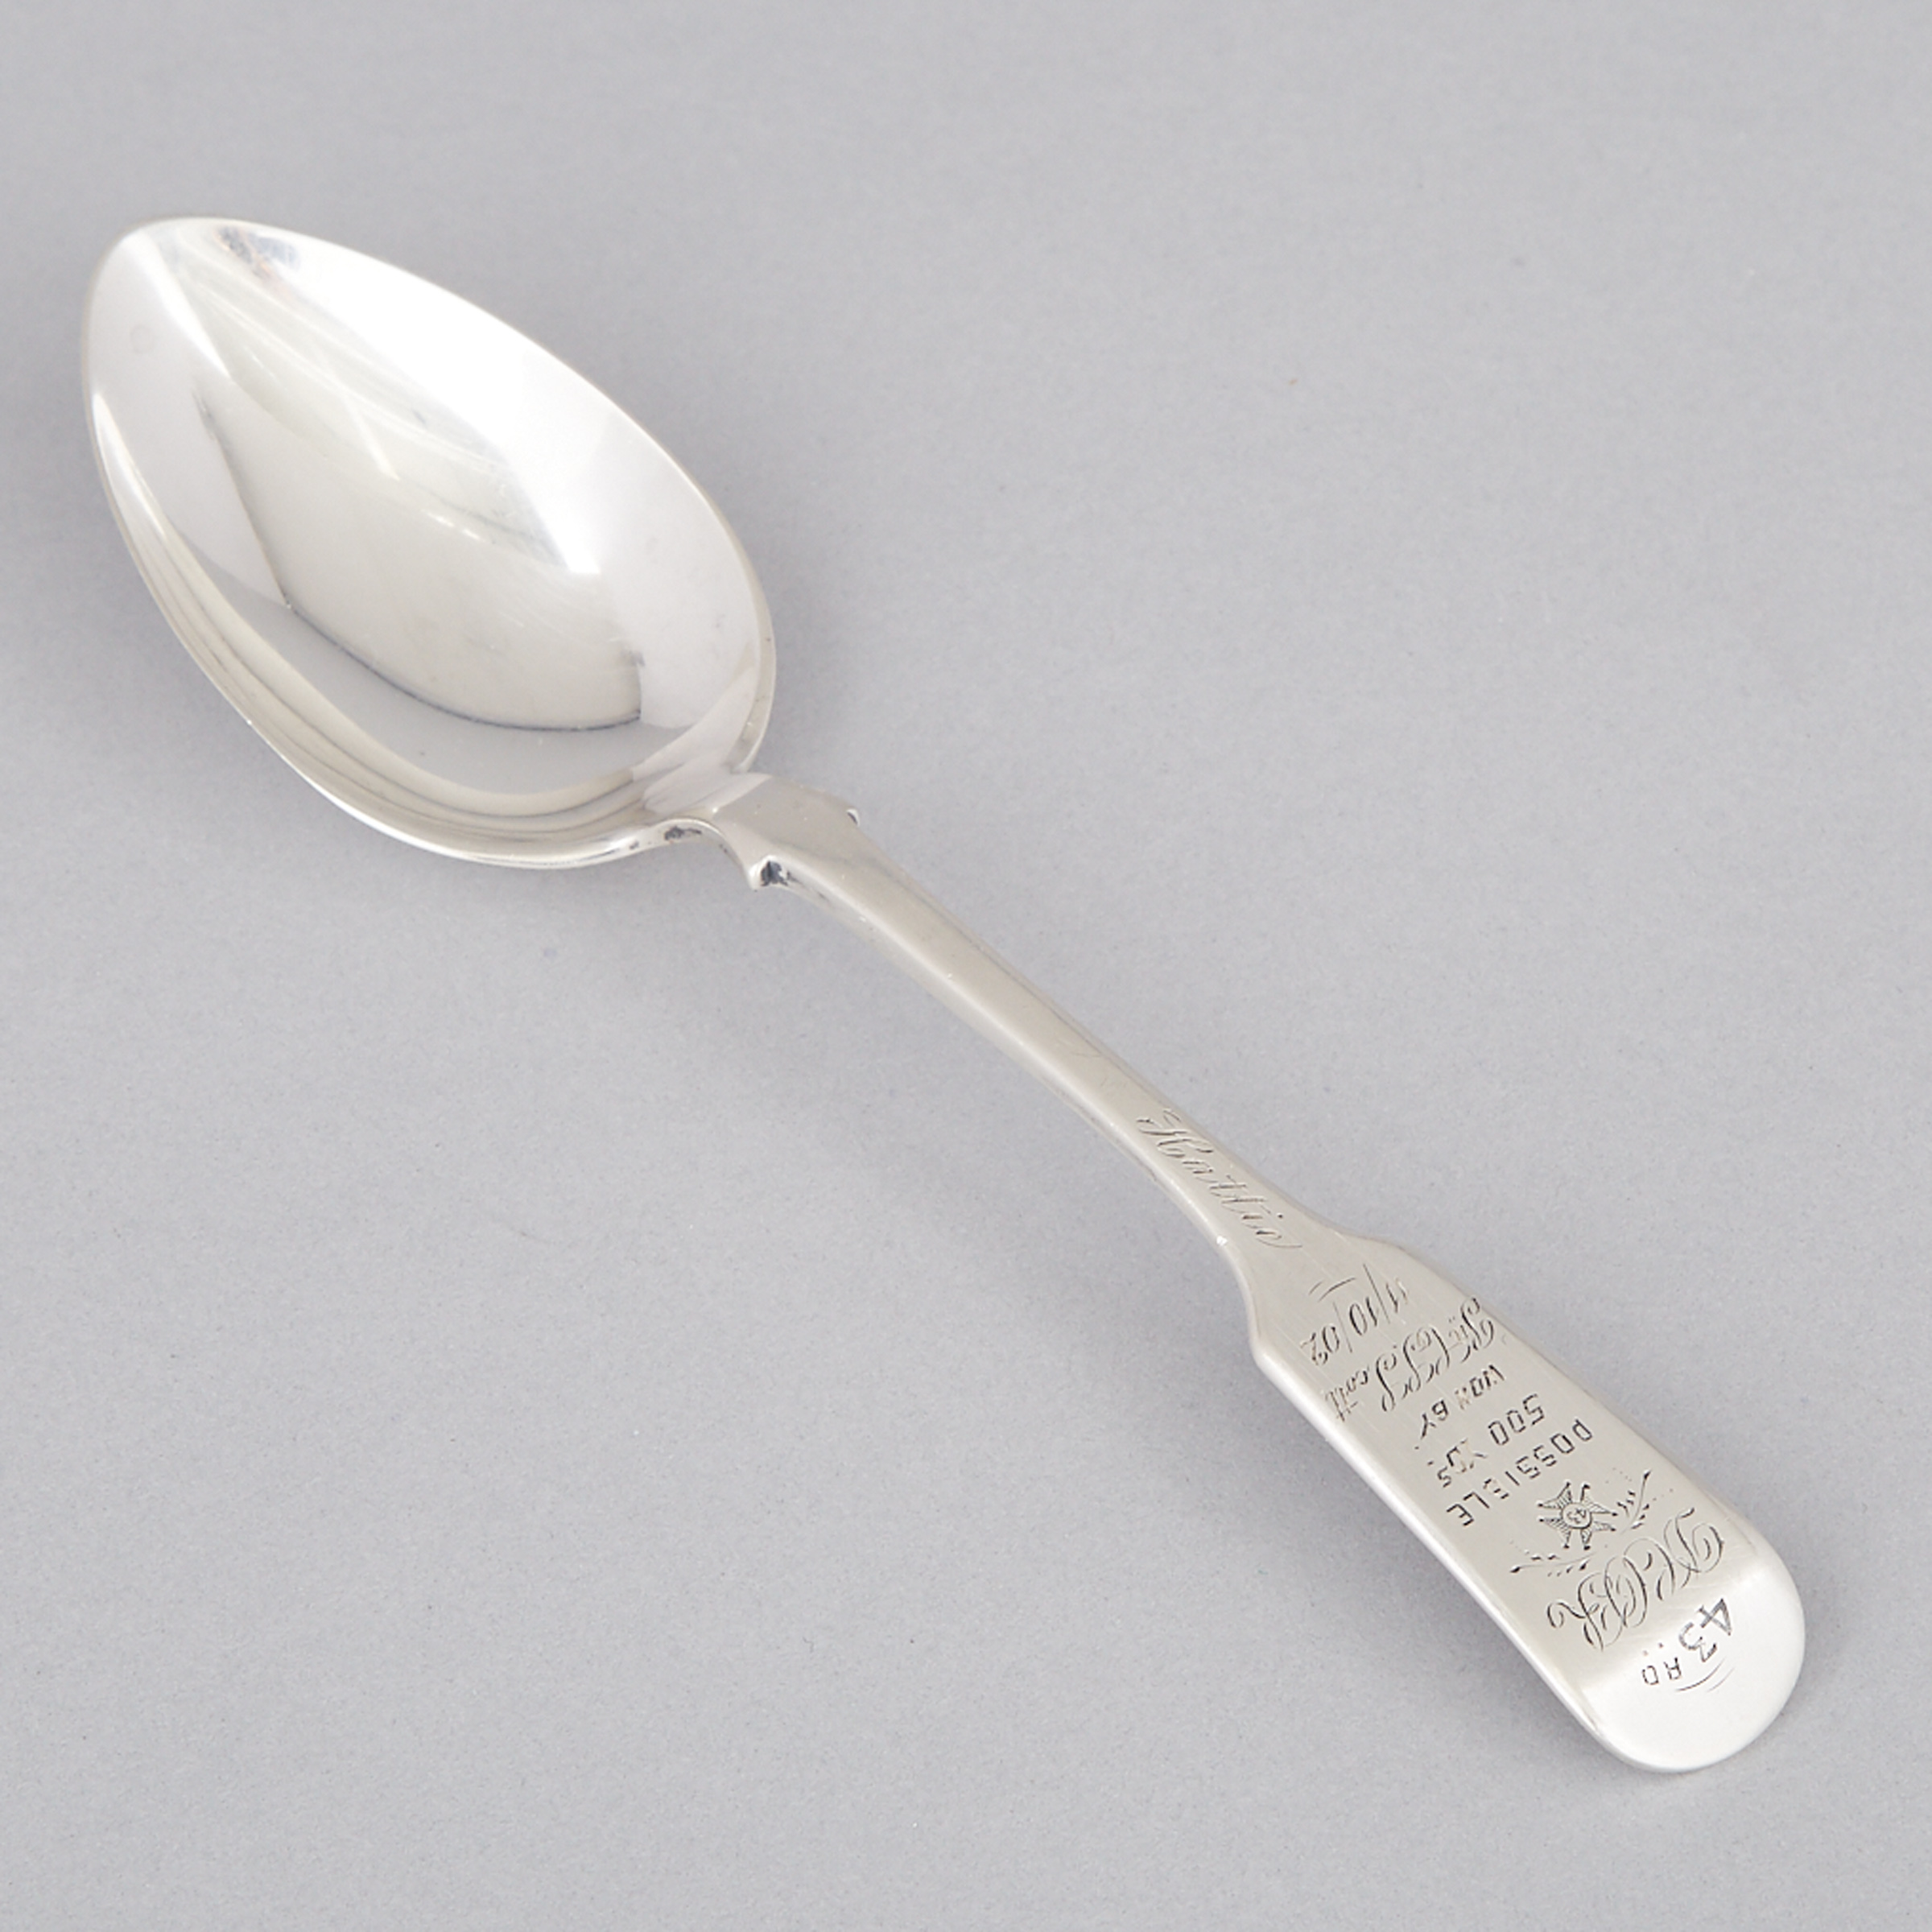 Canadian Silver Duke of Cornwall’s Own Rifles 43rd Regiment Marksmanship Trophy Spoon, 1902